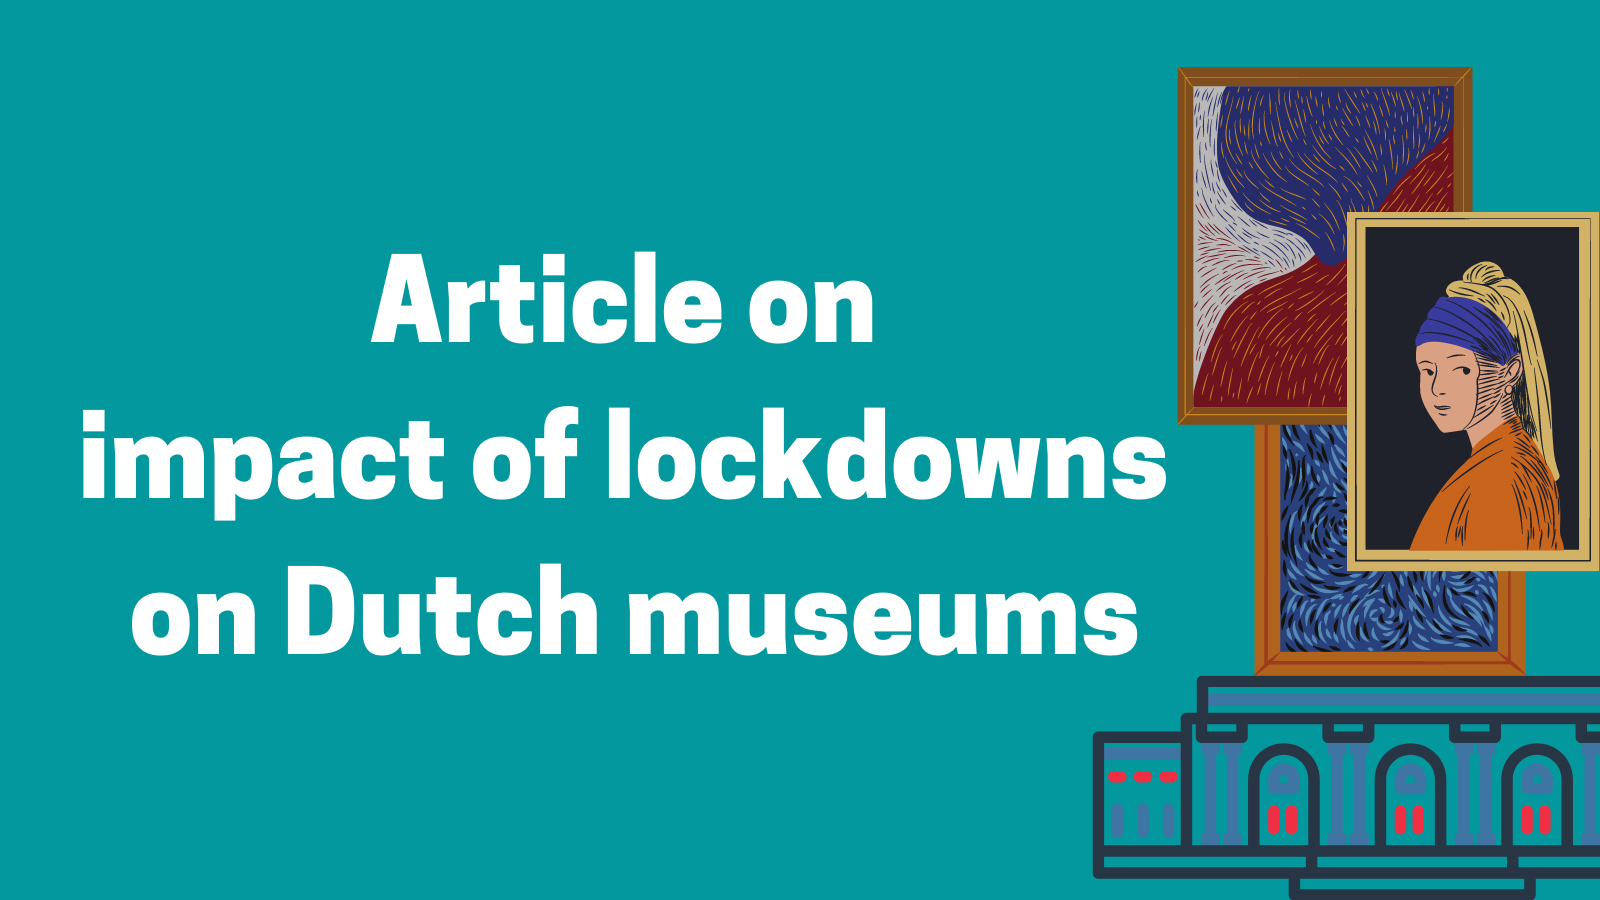 Impact of Covid-related lockdowns on museums in The Netherlands